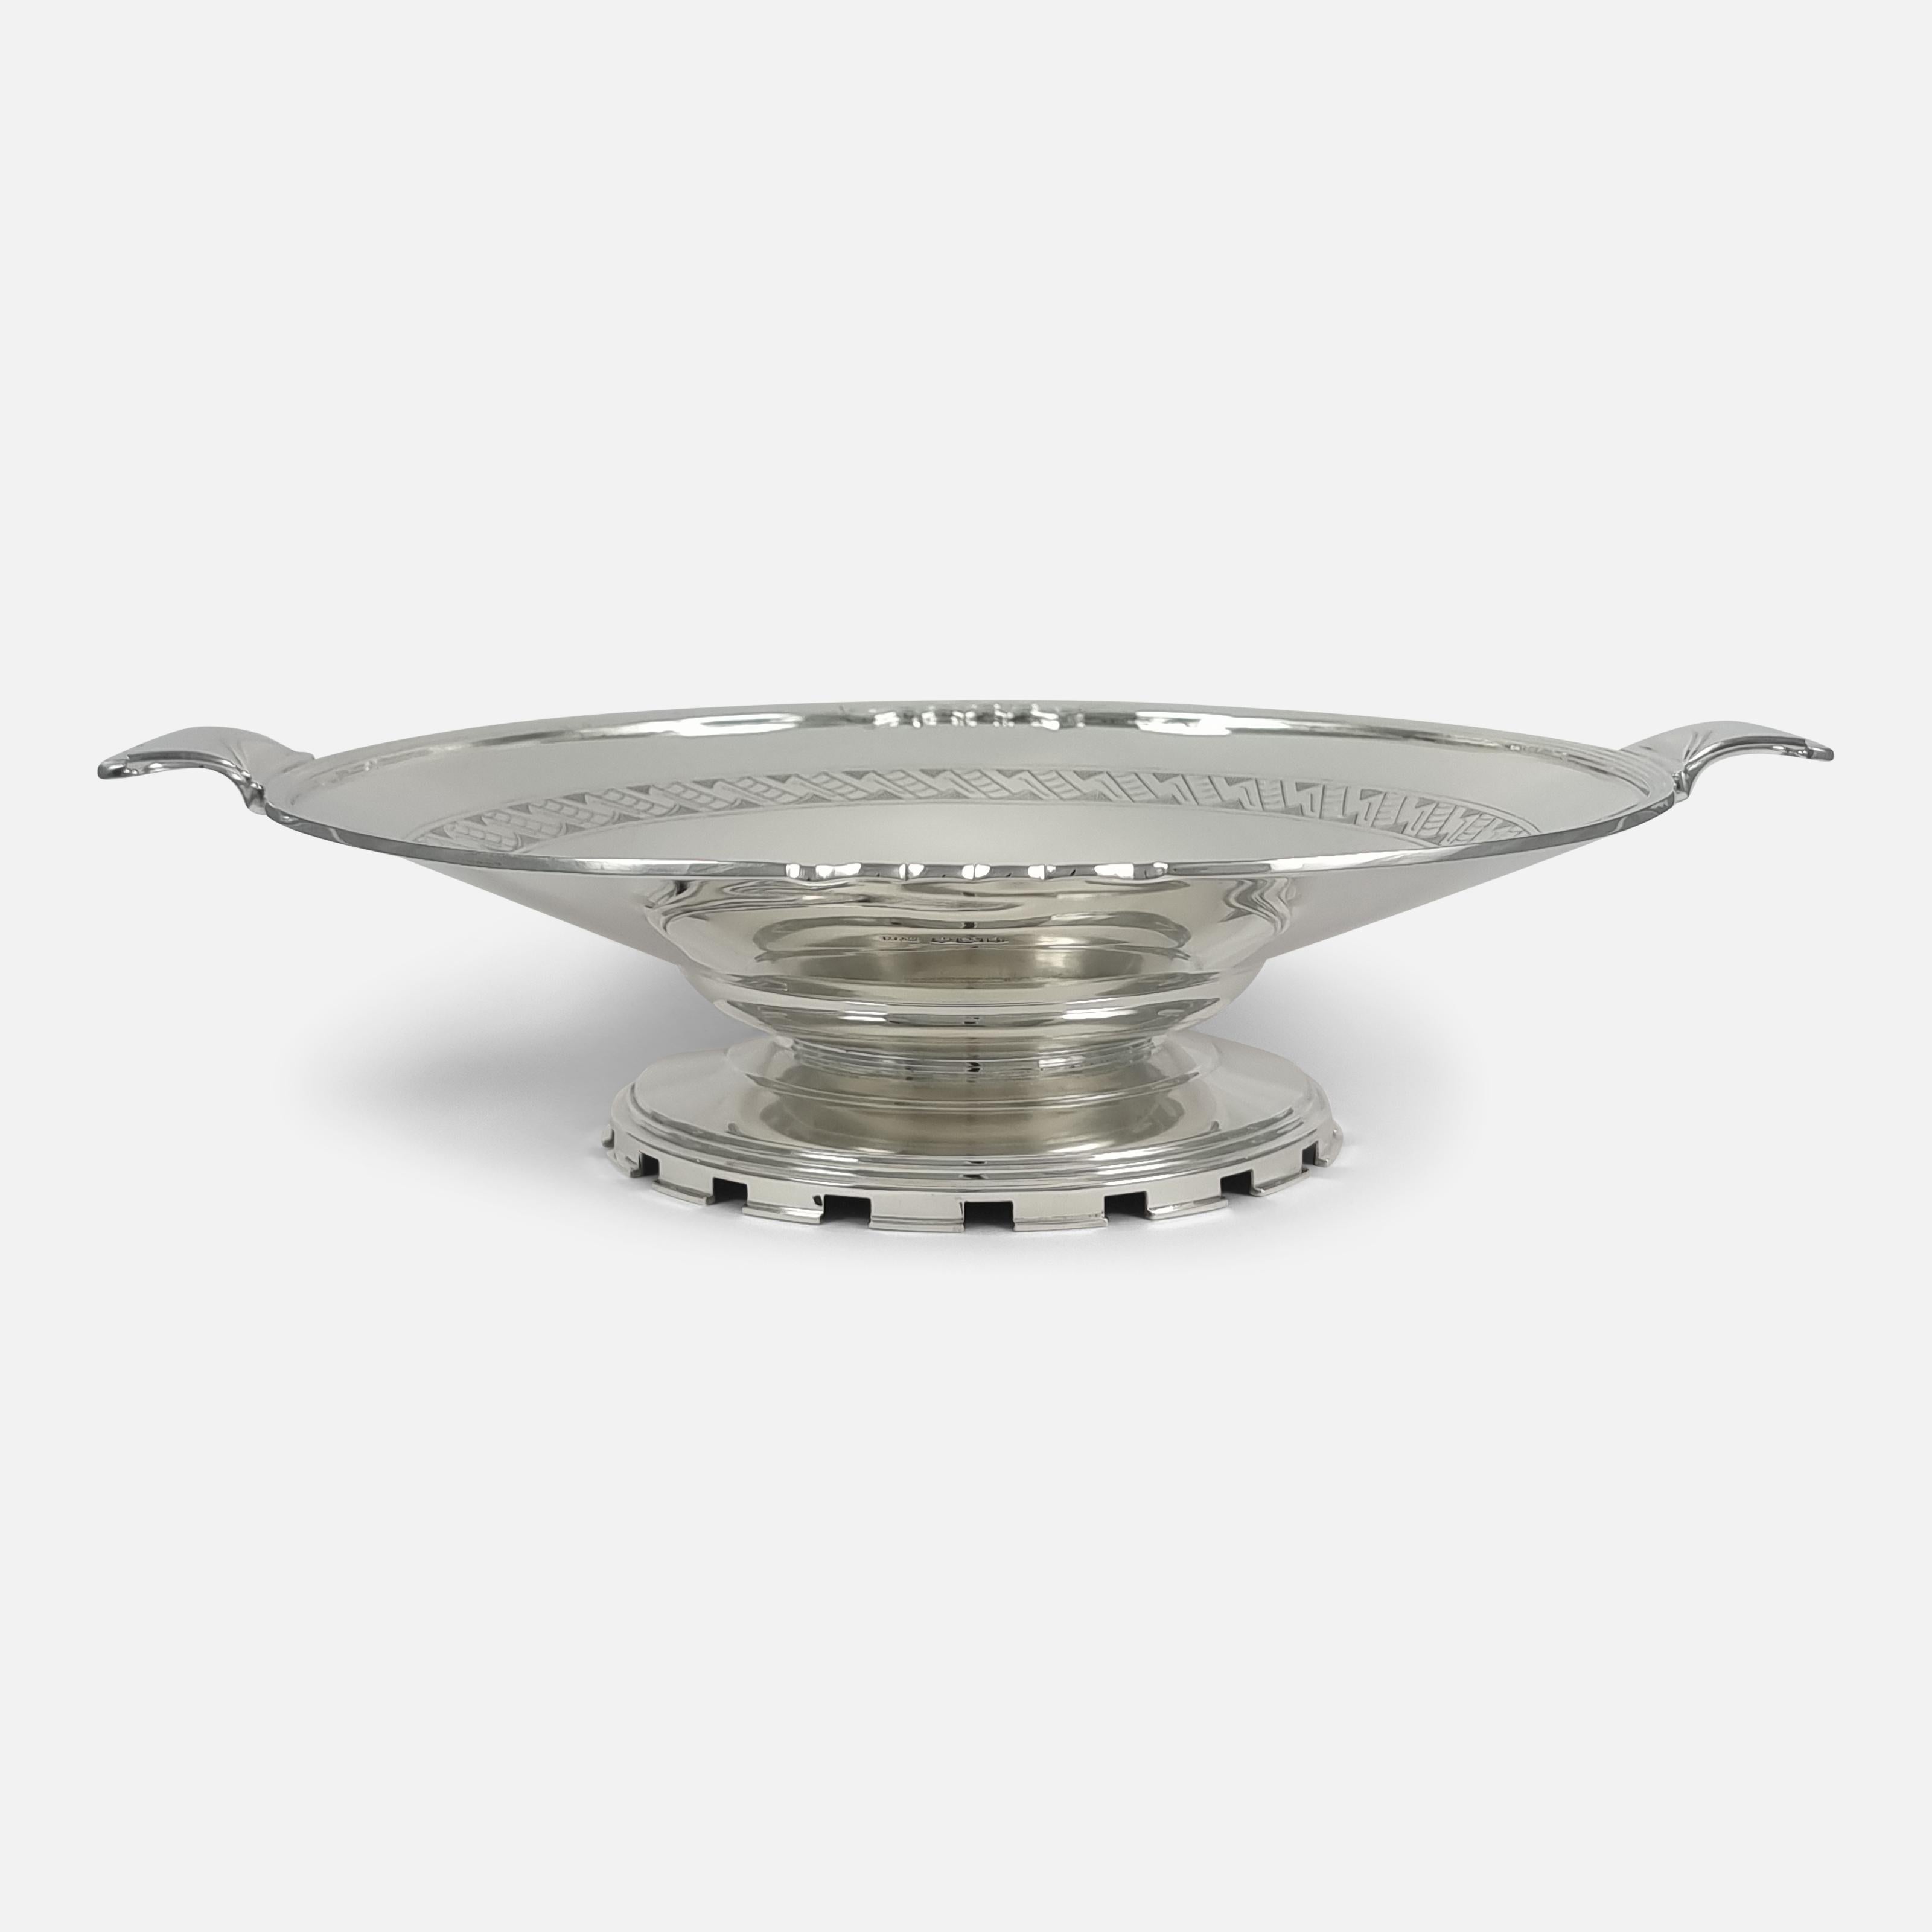 British Art Deco Sterling Silver Dish, Mappin & Webb, 1936 For Sale